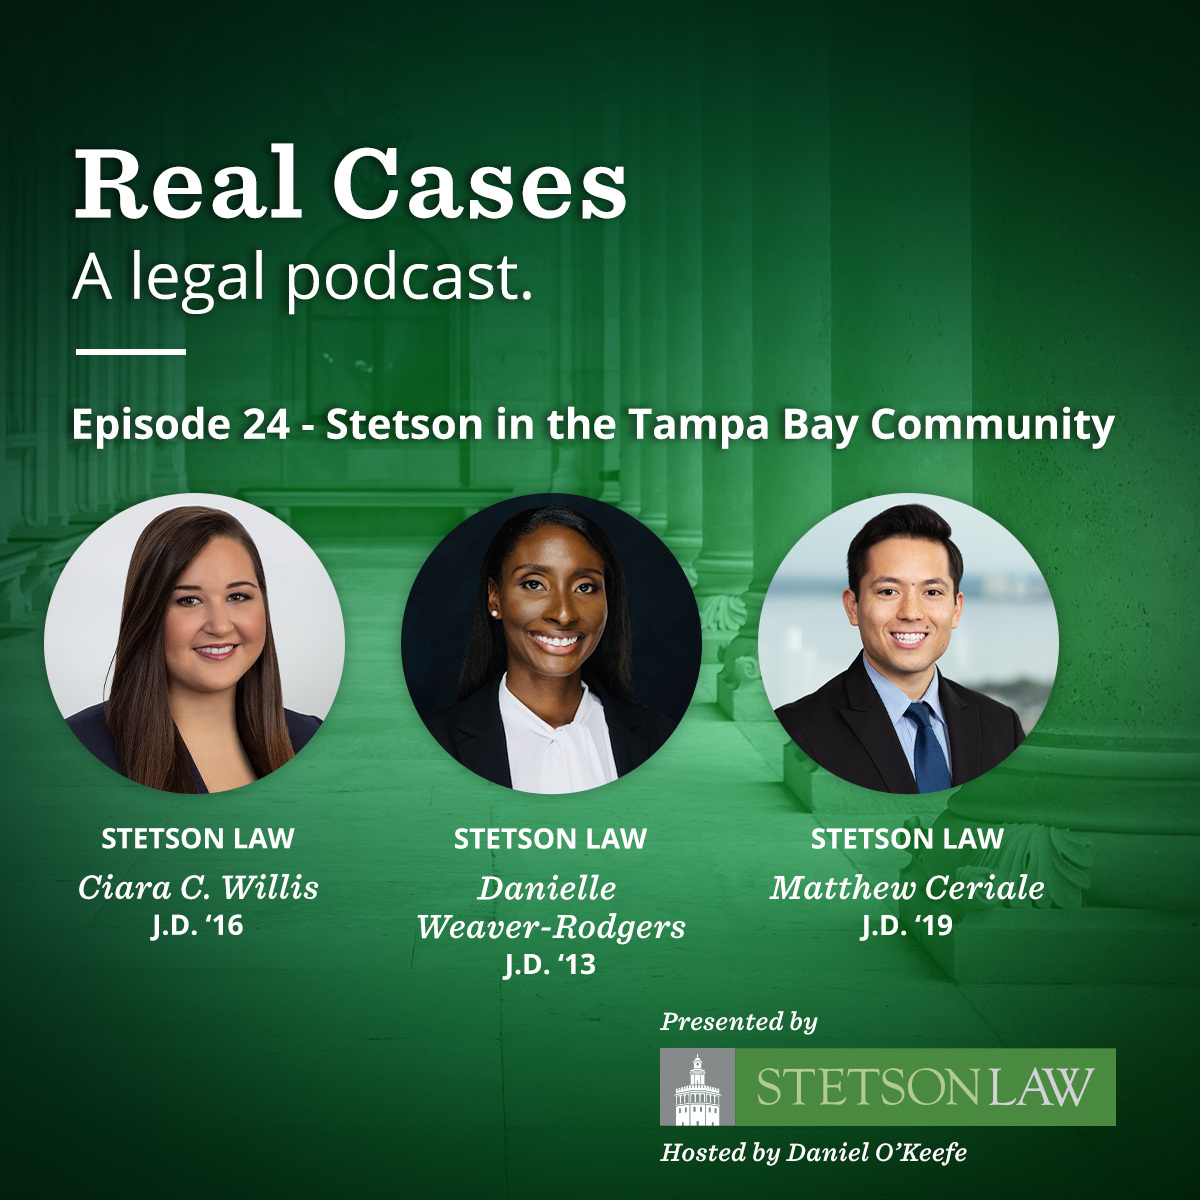 Real Cases - a legal podcast. Episode 24: Stetson in the Tampa Bay Community - Ciara Willis, Matthew Ceriale, Danielle Weaver-Rogers